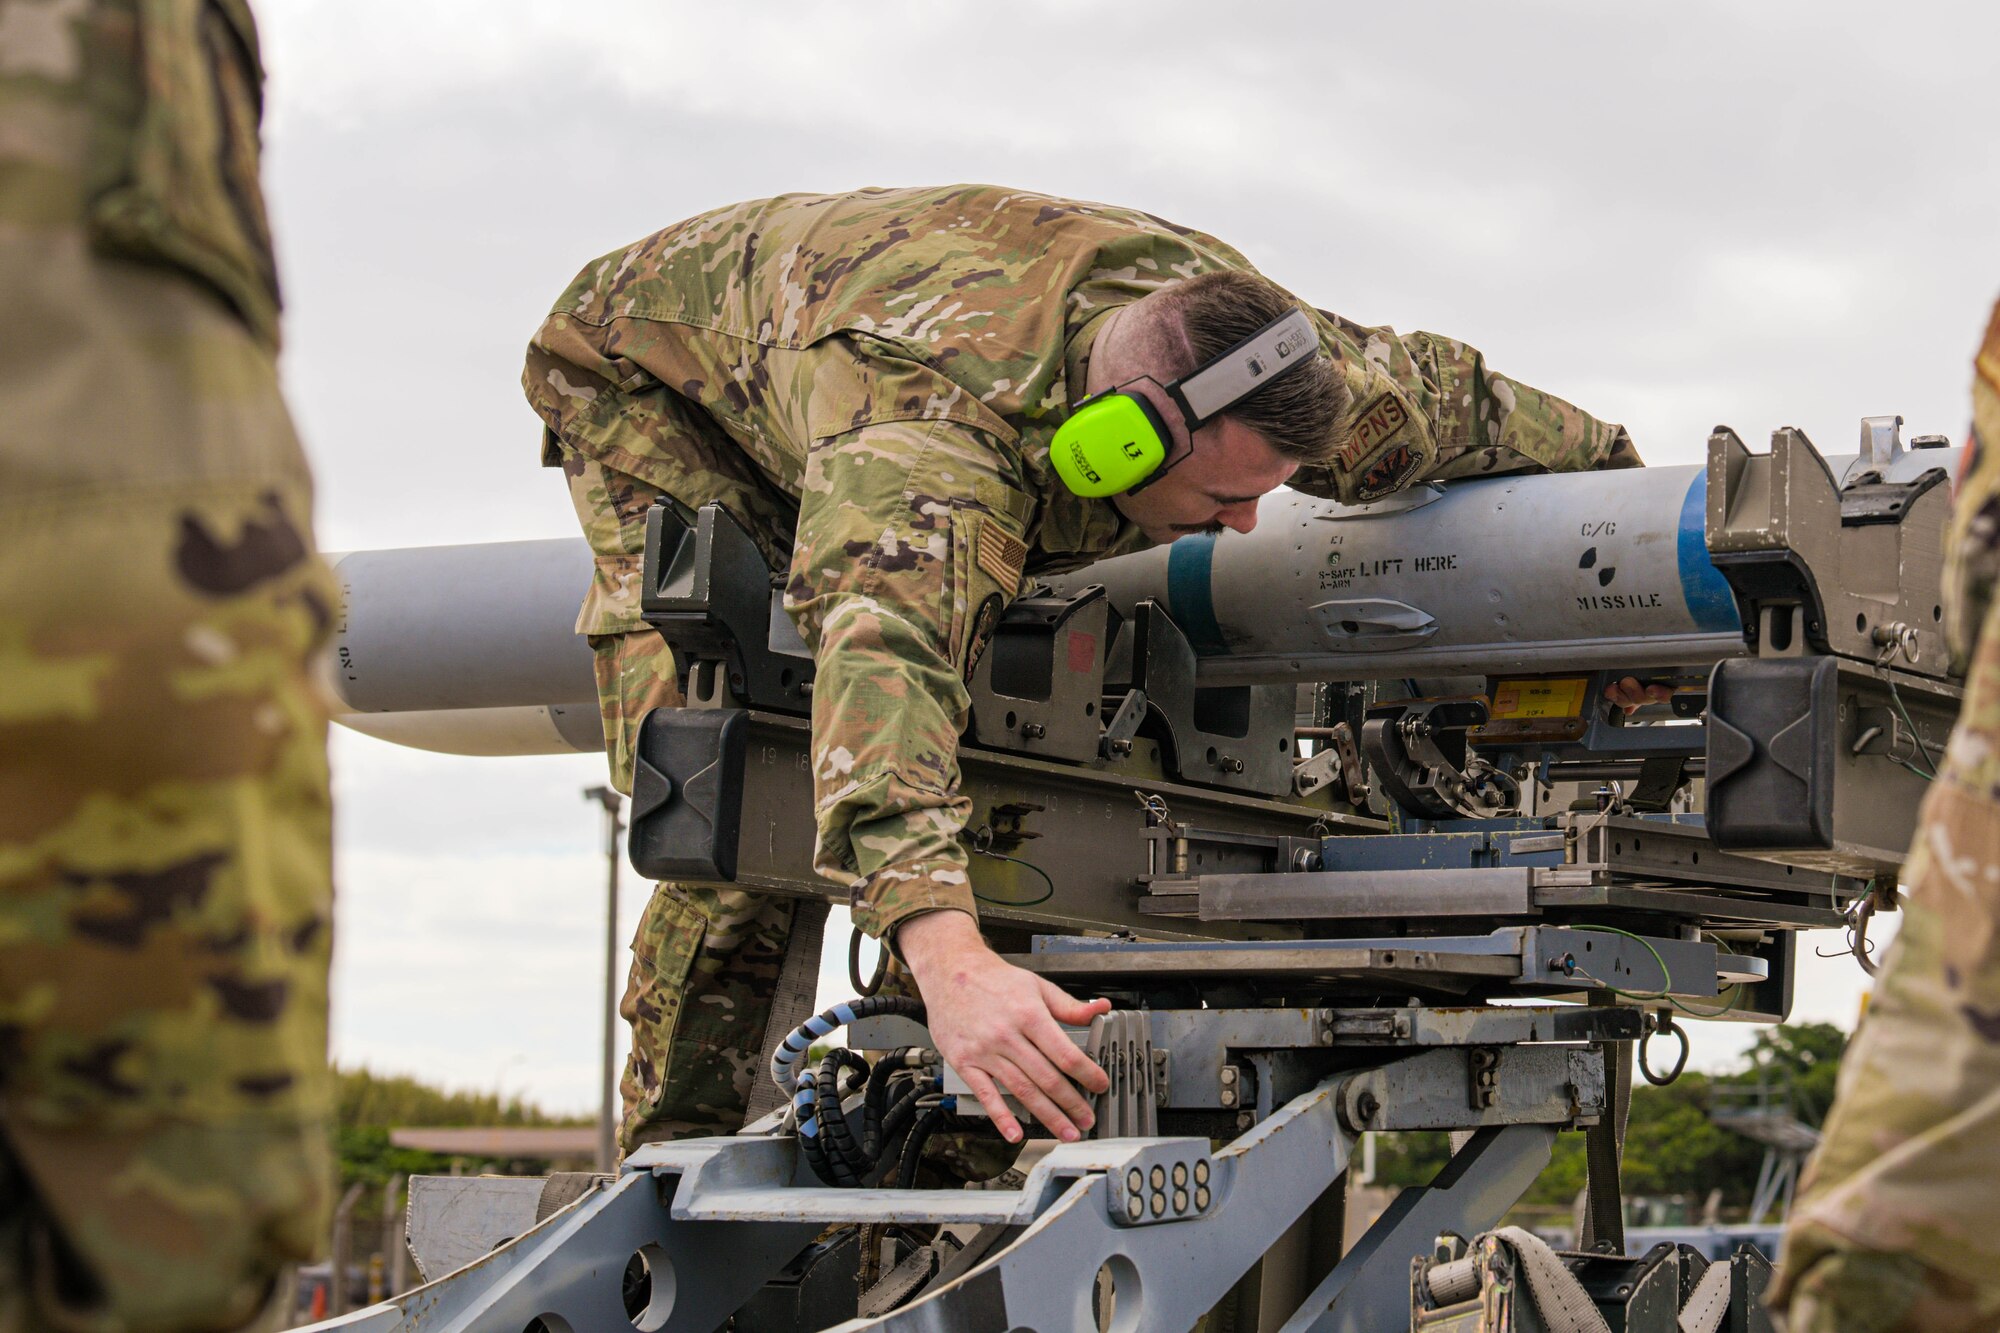 Airman prepares to load munitions